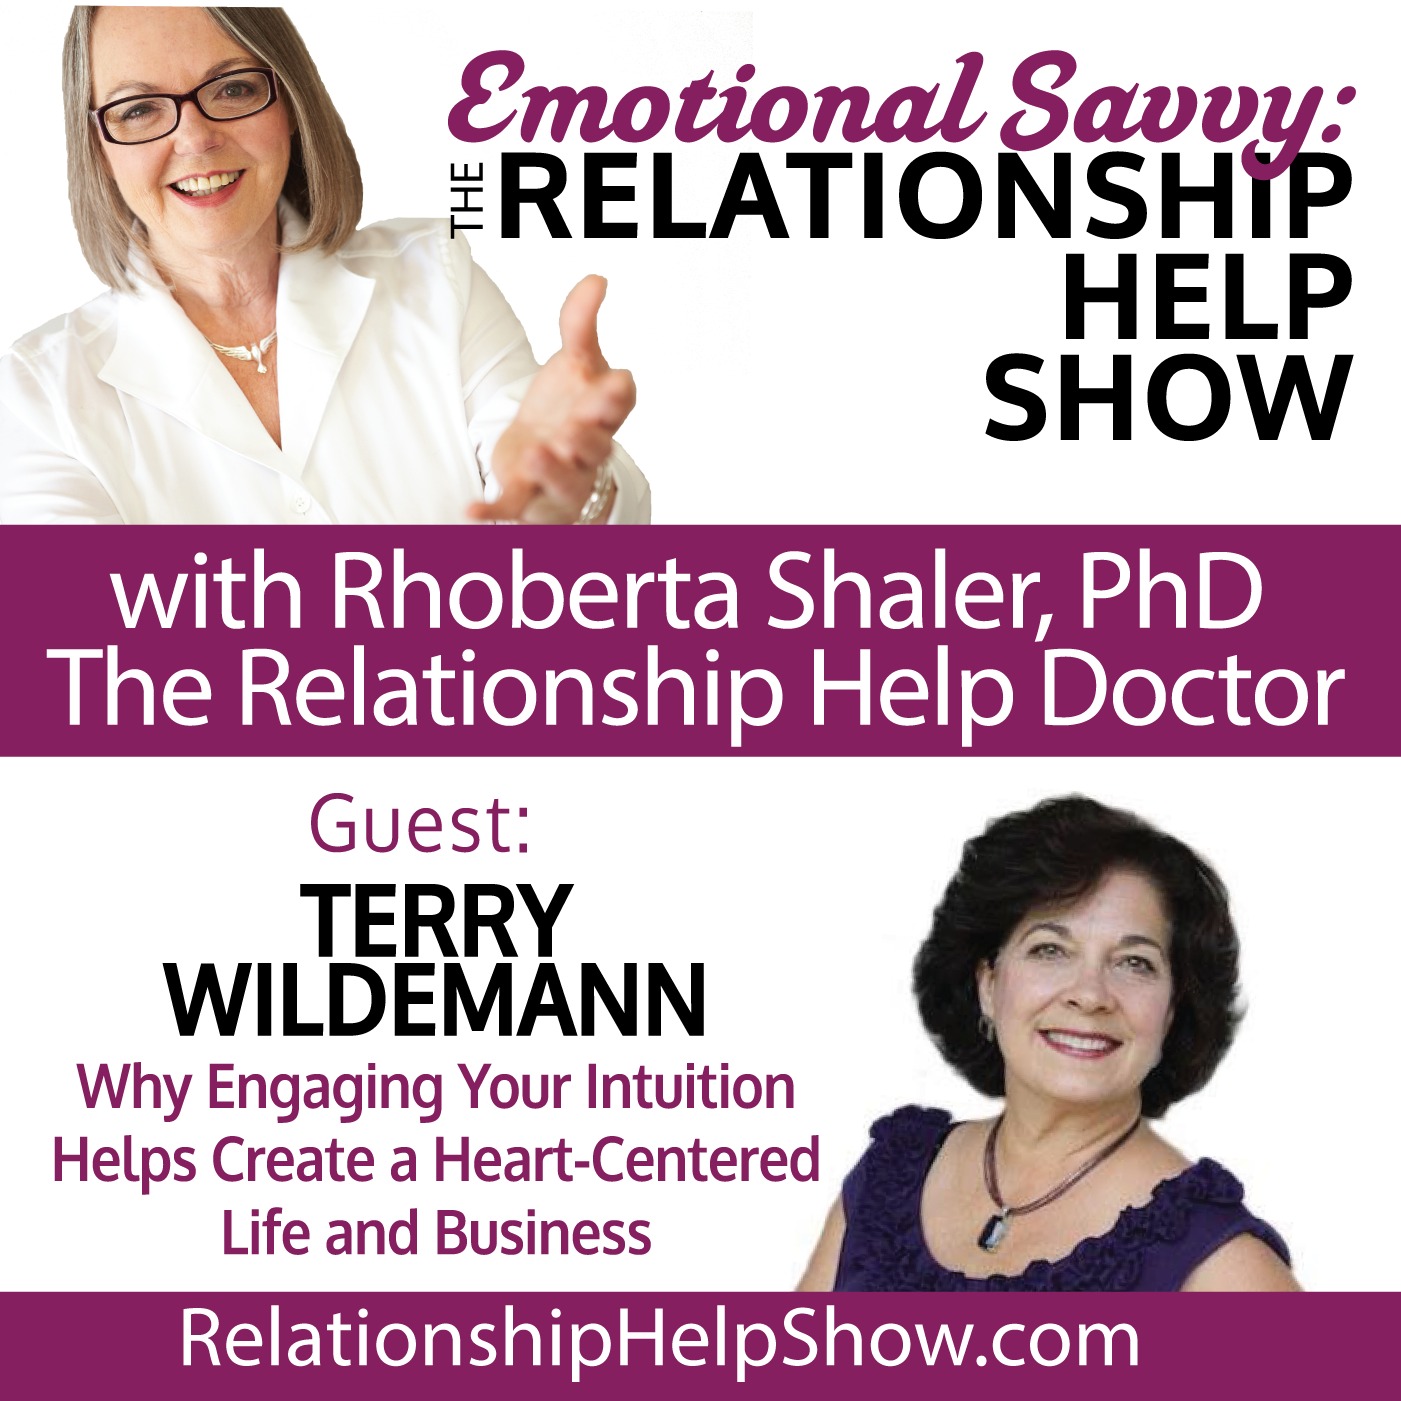 Are You Spiritually-Minded? What About Intuition? GUEST - Terry Wildemann